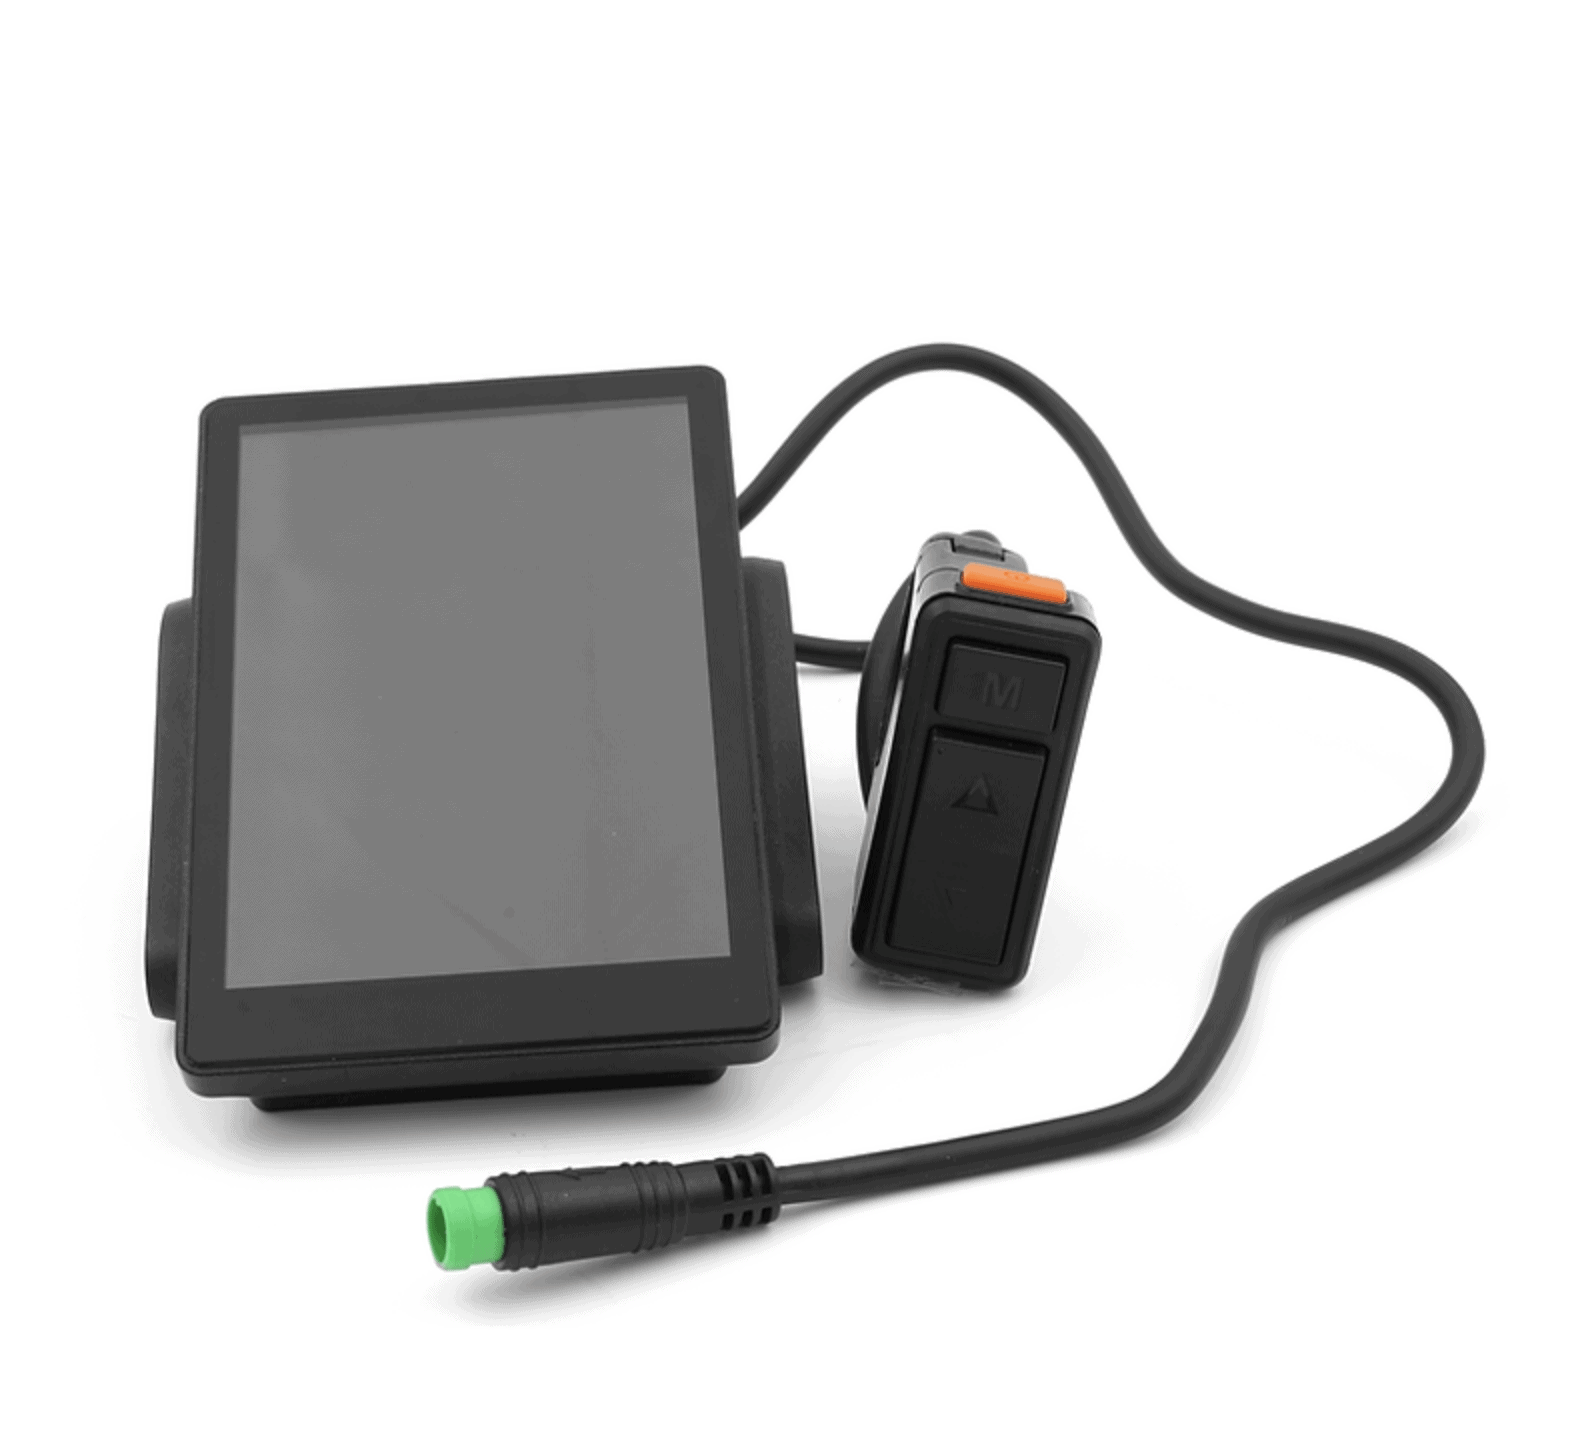 A tablet and charger on a table.